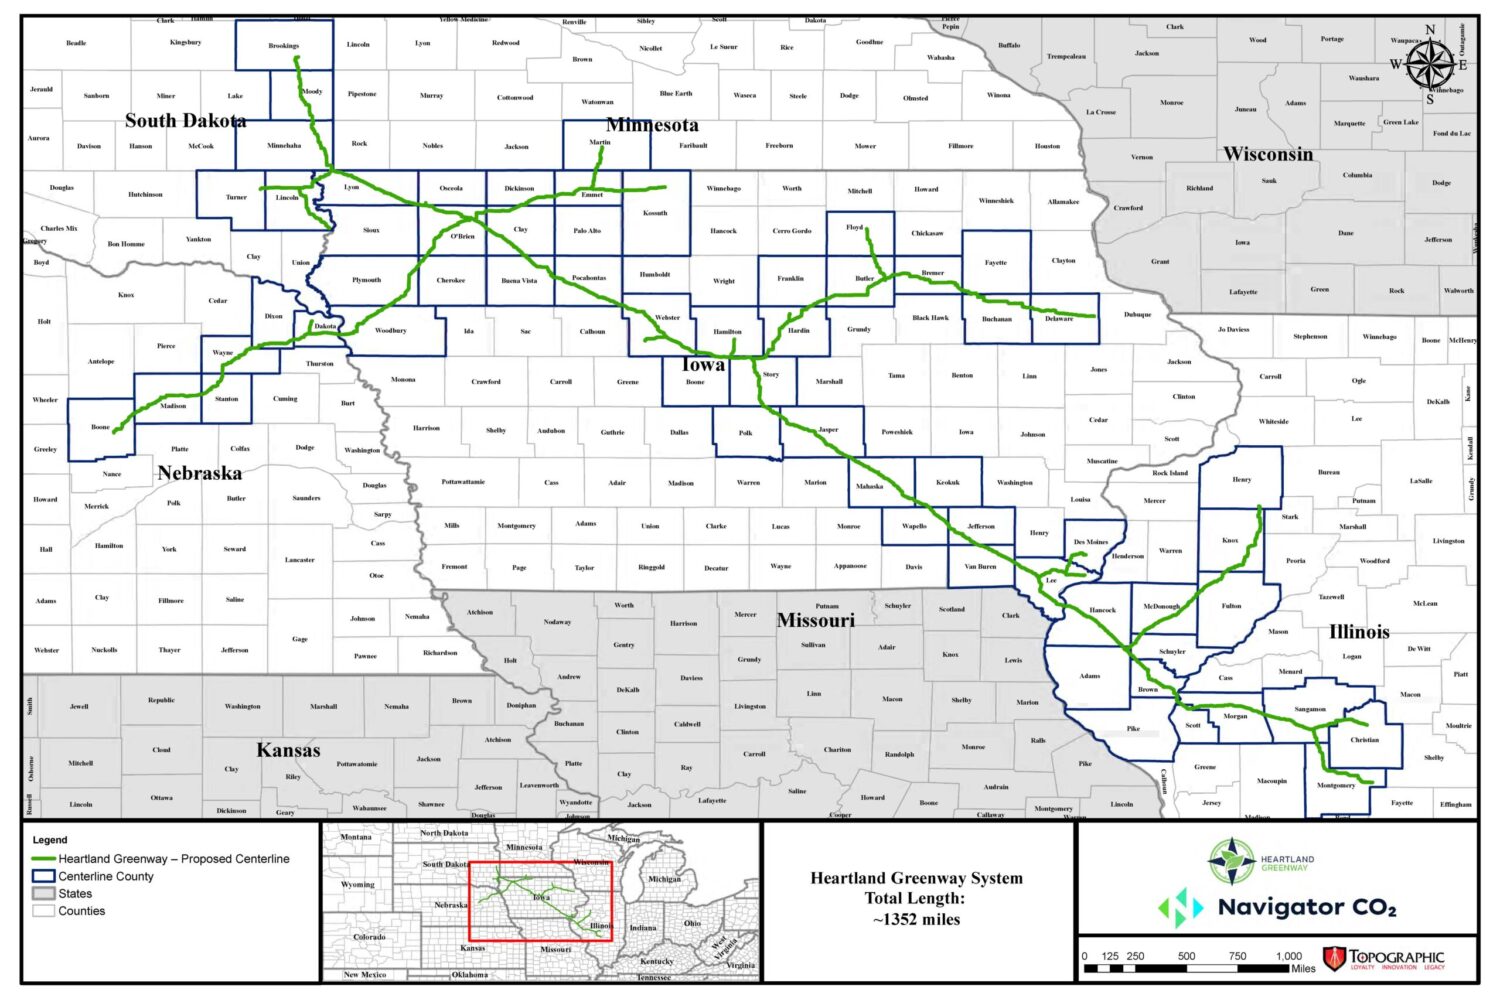 The proposed route of the Navigator's CO2 carbon sequestration pipeline. Courtesy of Navigator CO2